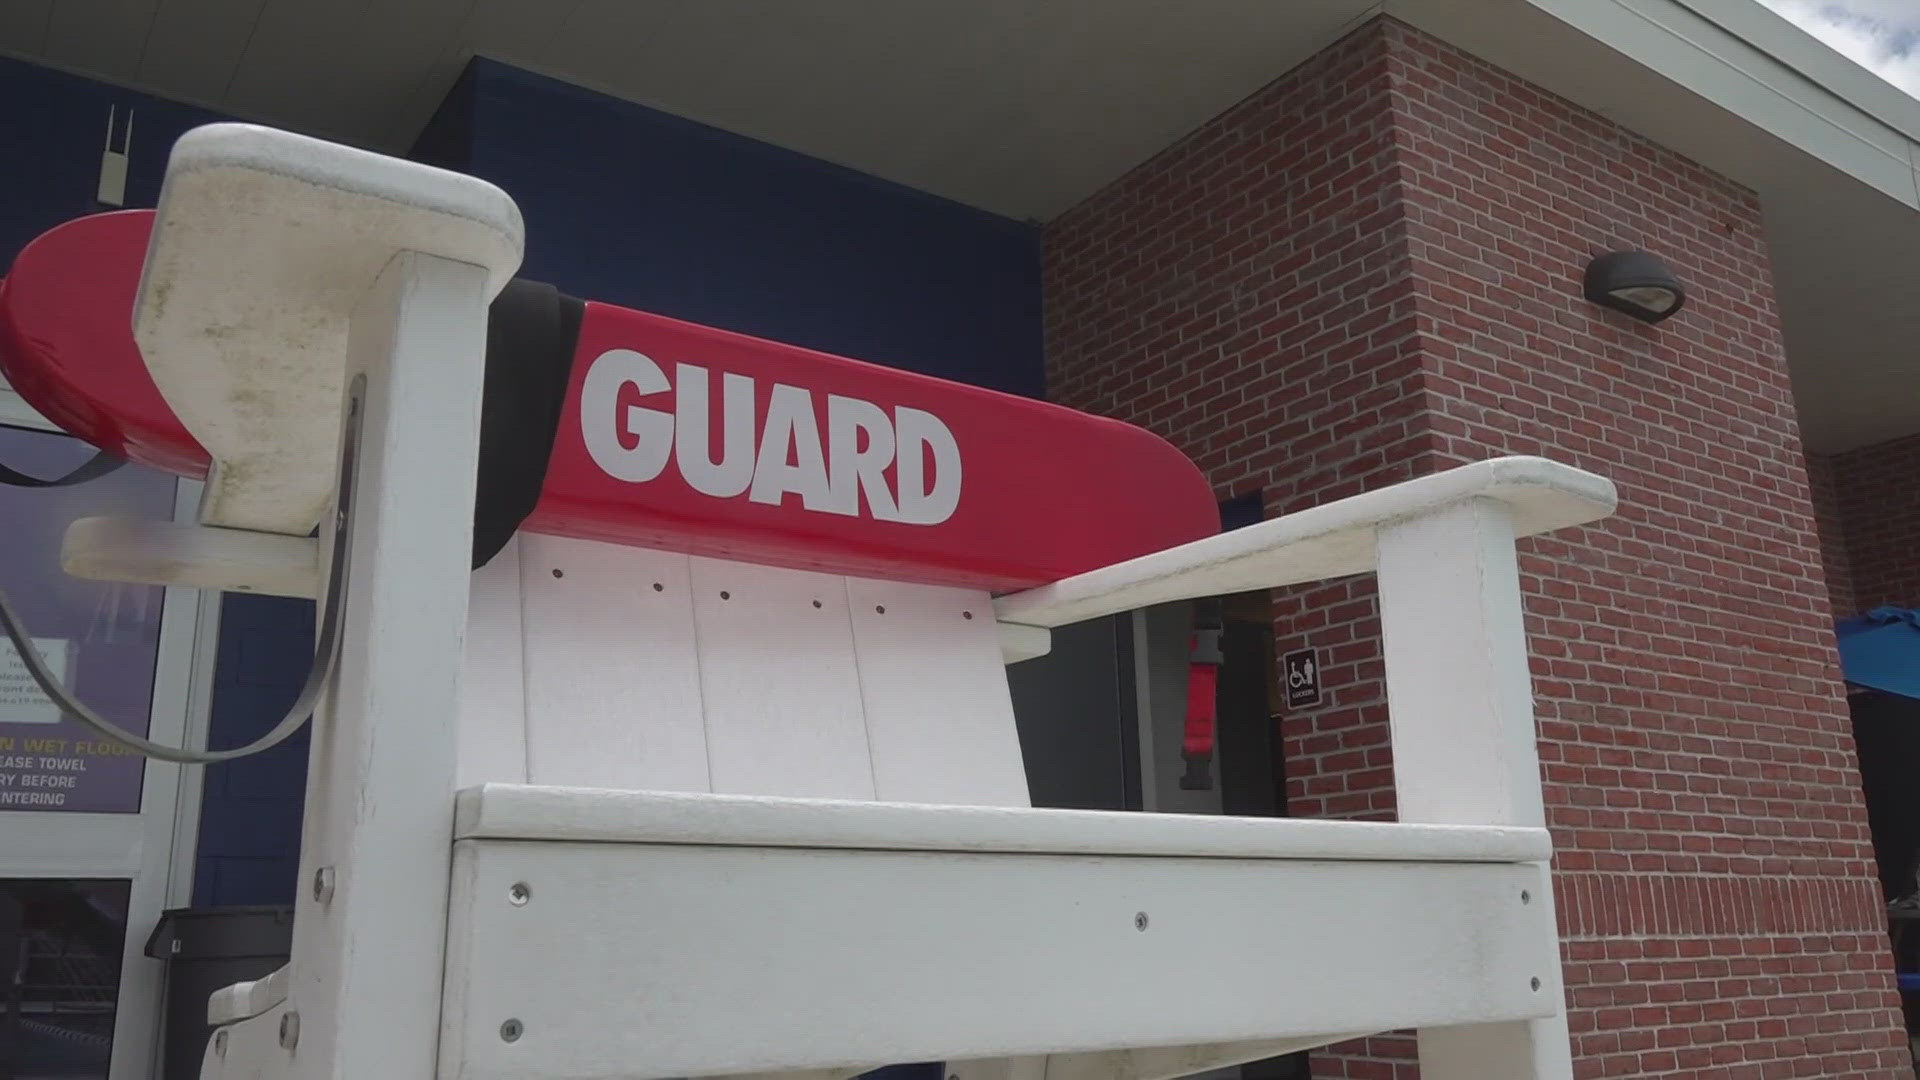 Over the past two years, a lifeguard shortage forced New Orleans’ recreation department to keep some public pools closed.